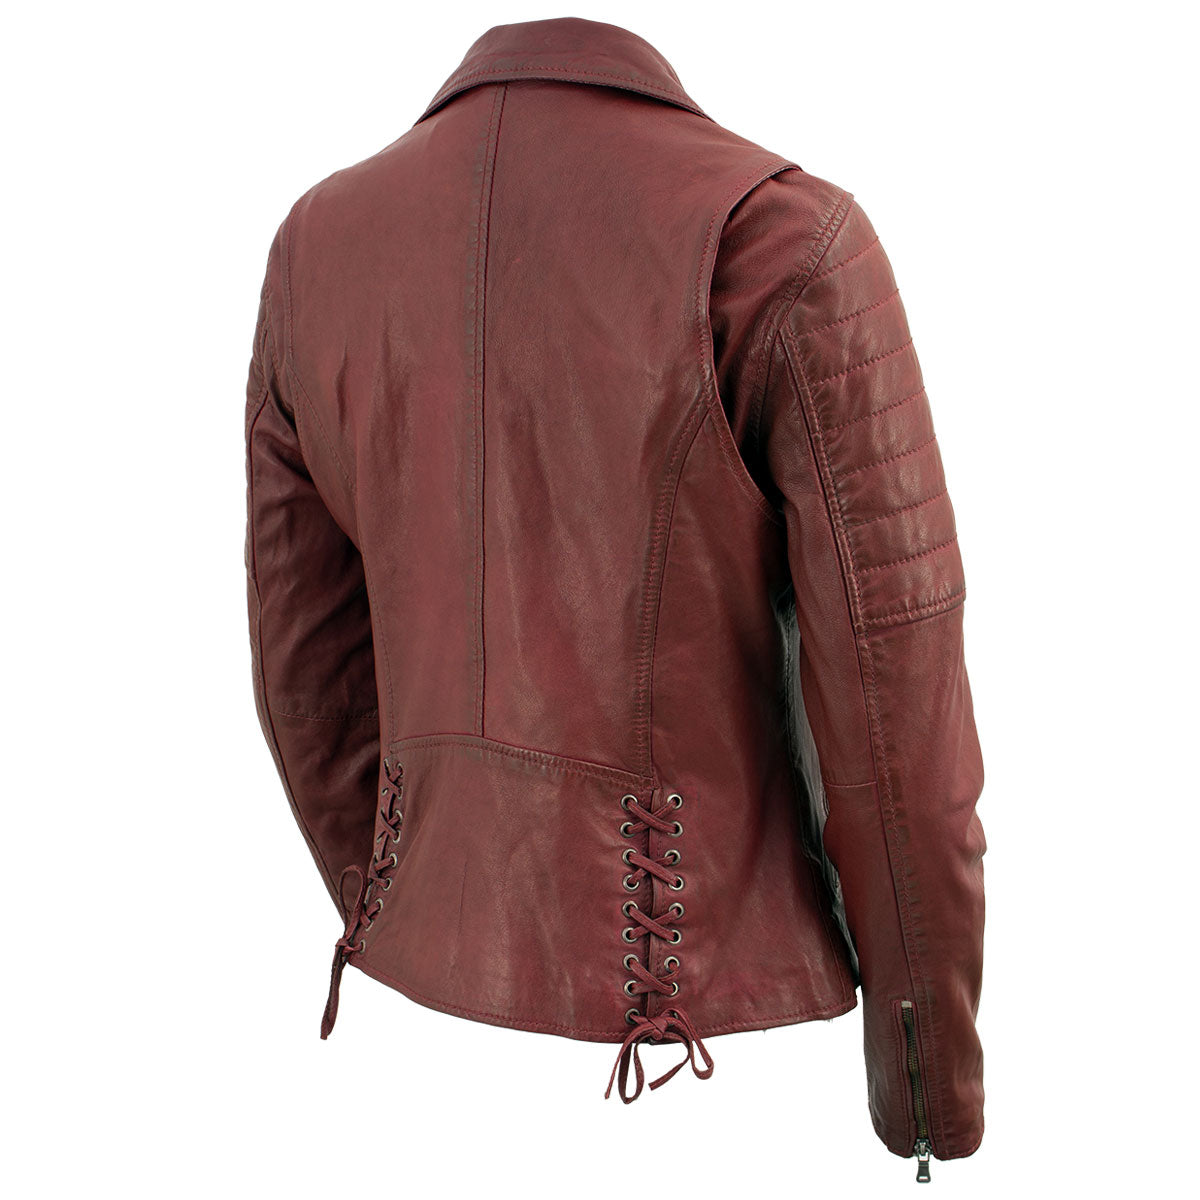 Milwaukee Leather SFL2812 Red Vintage Motorcycle Inspired Leather Jacket for Women - Veg-Tan Fashion Jacket